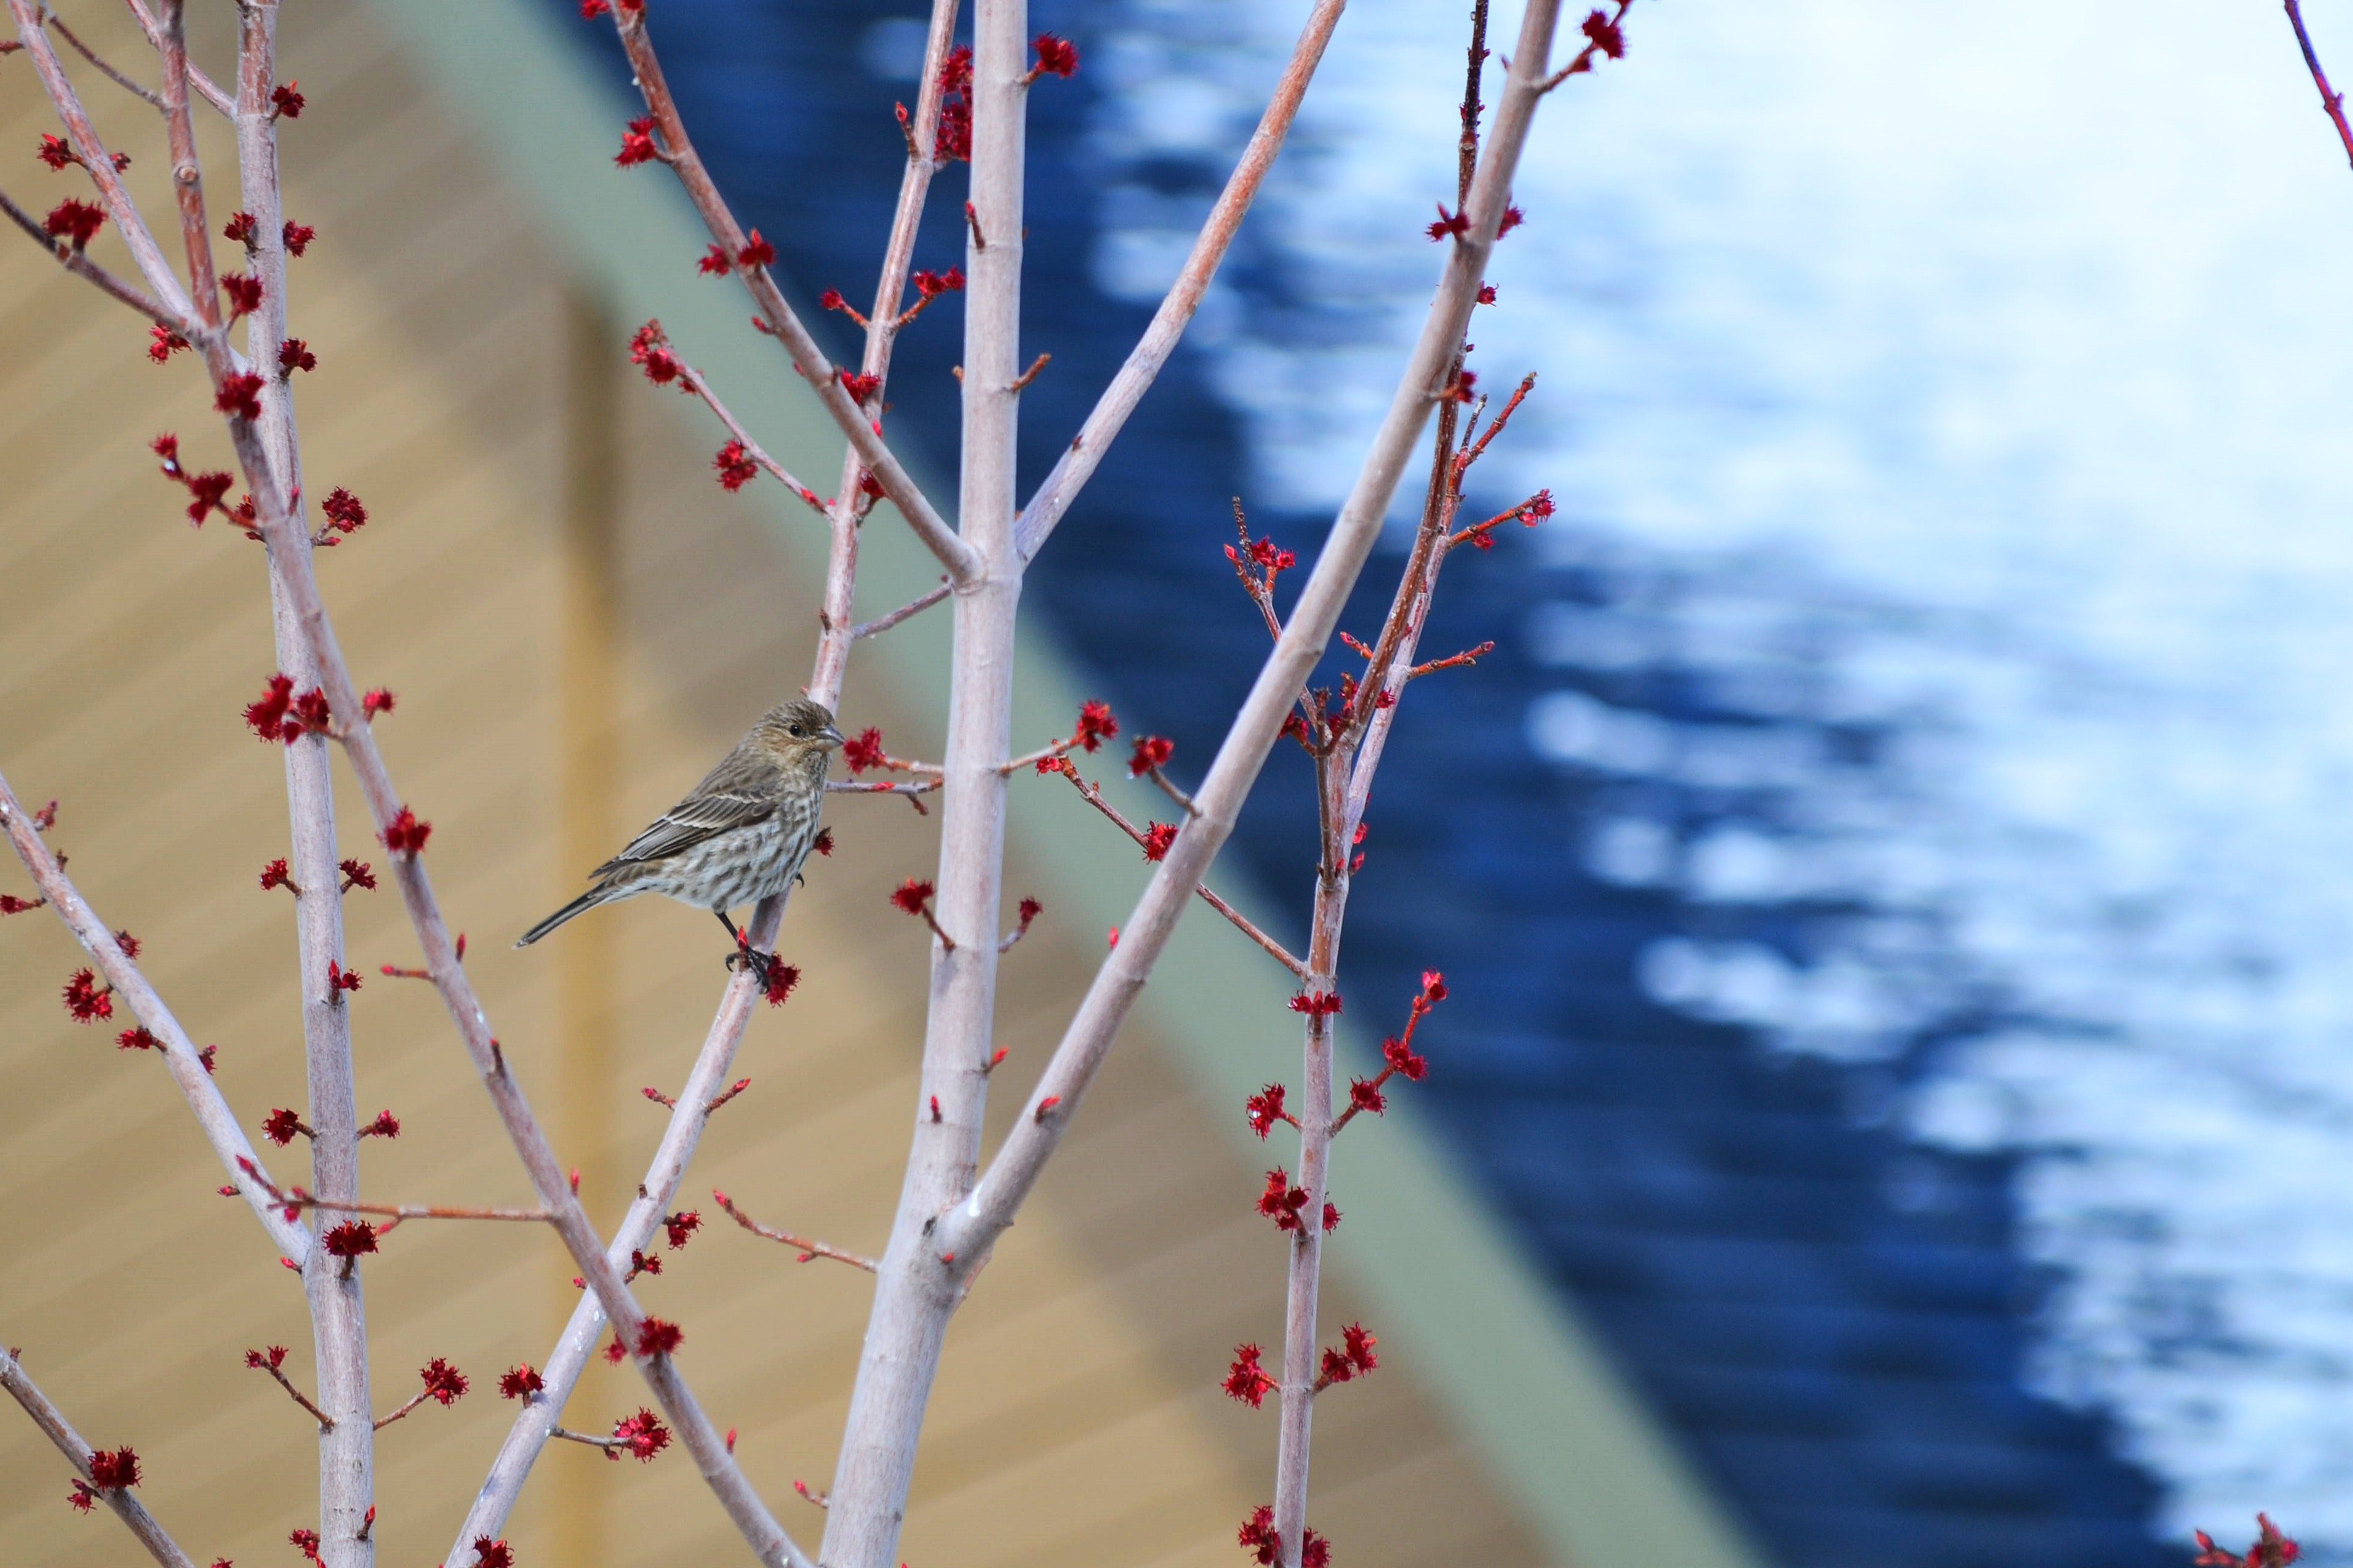 Little bird on a branch of a tree with red berries photo